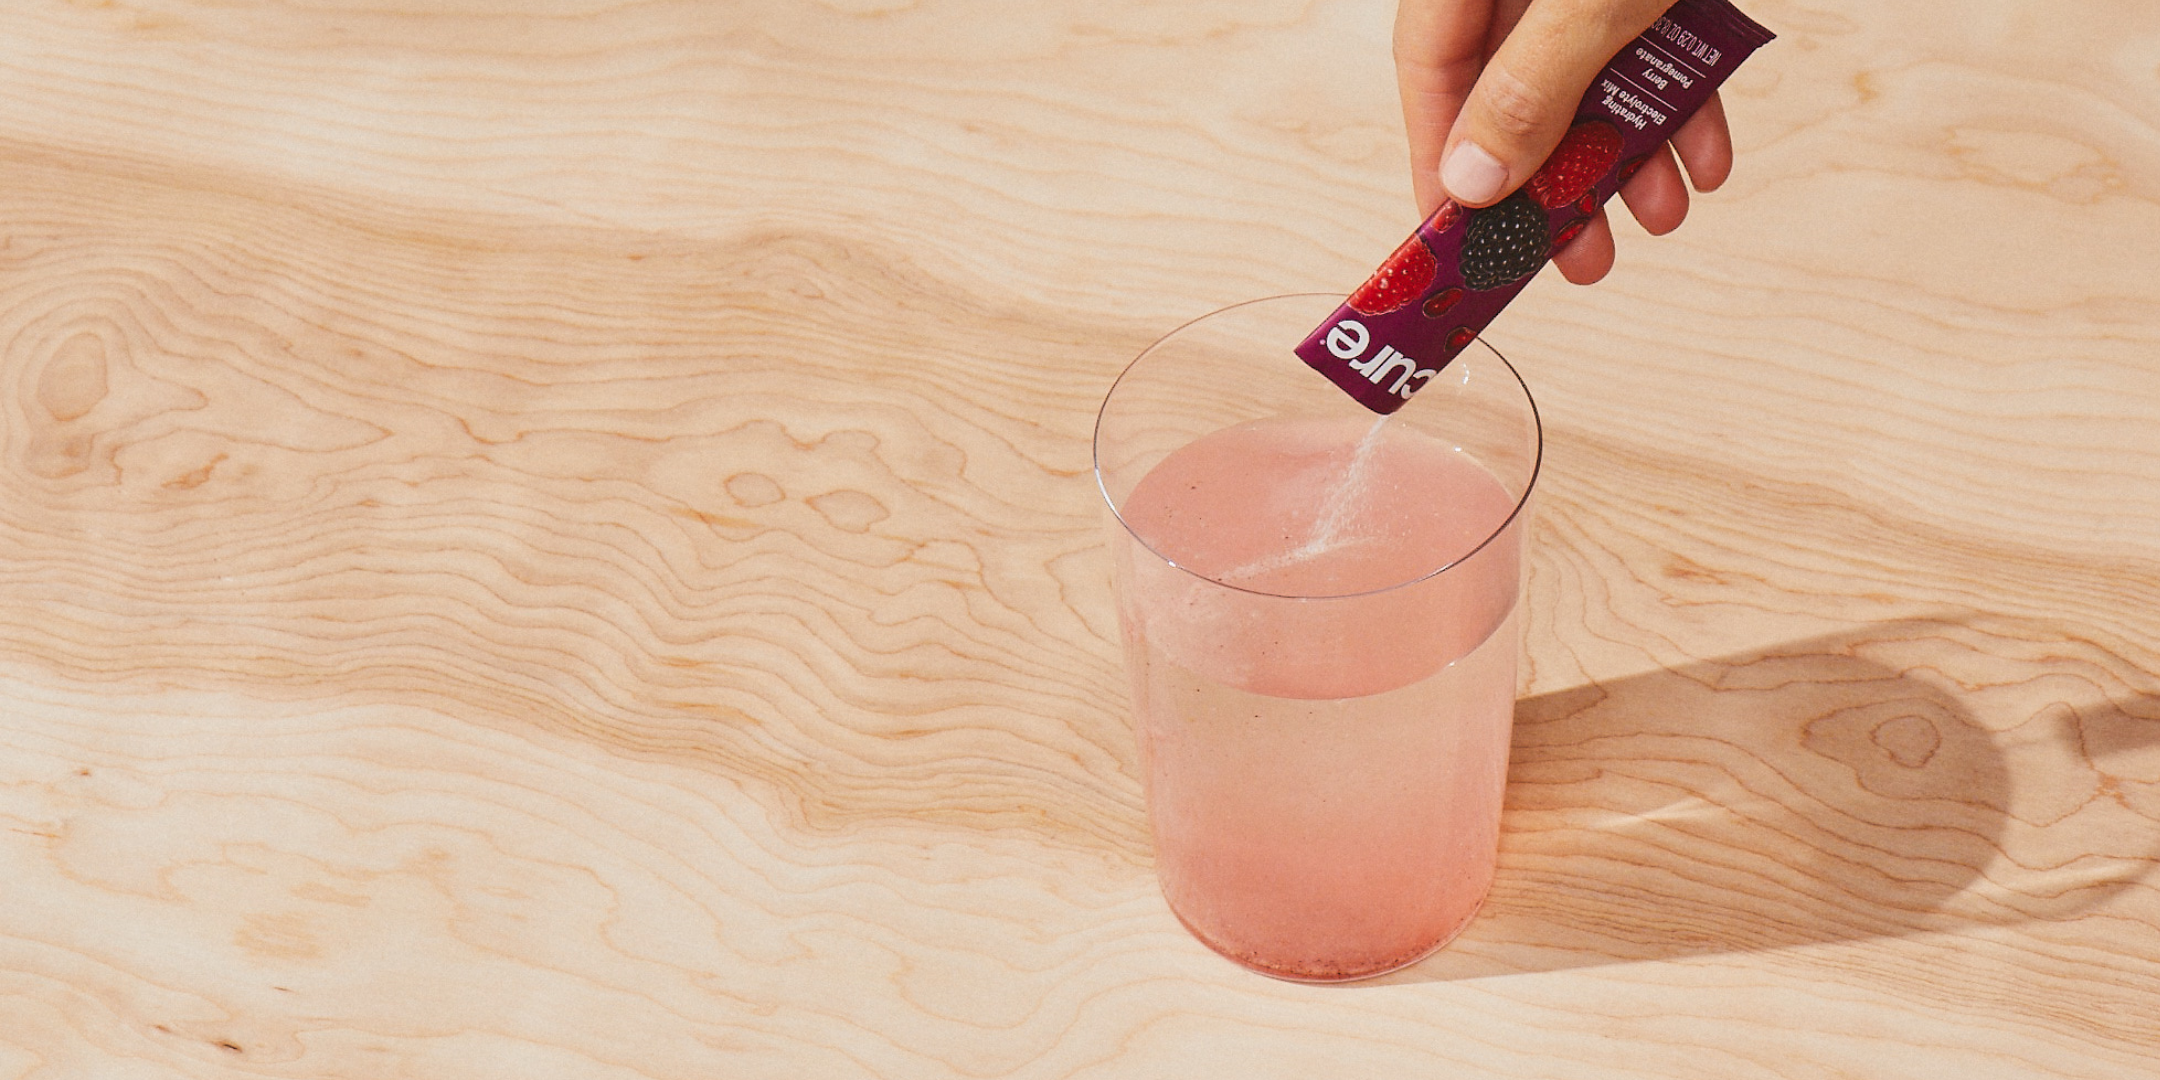 Hand pouring red 'Cure' powder into water, making a pink swirl on wood.